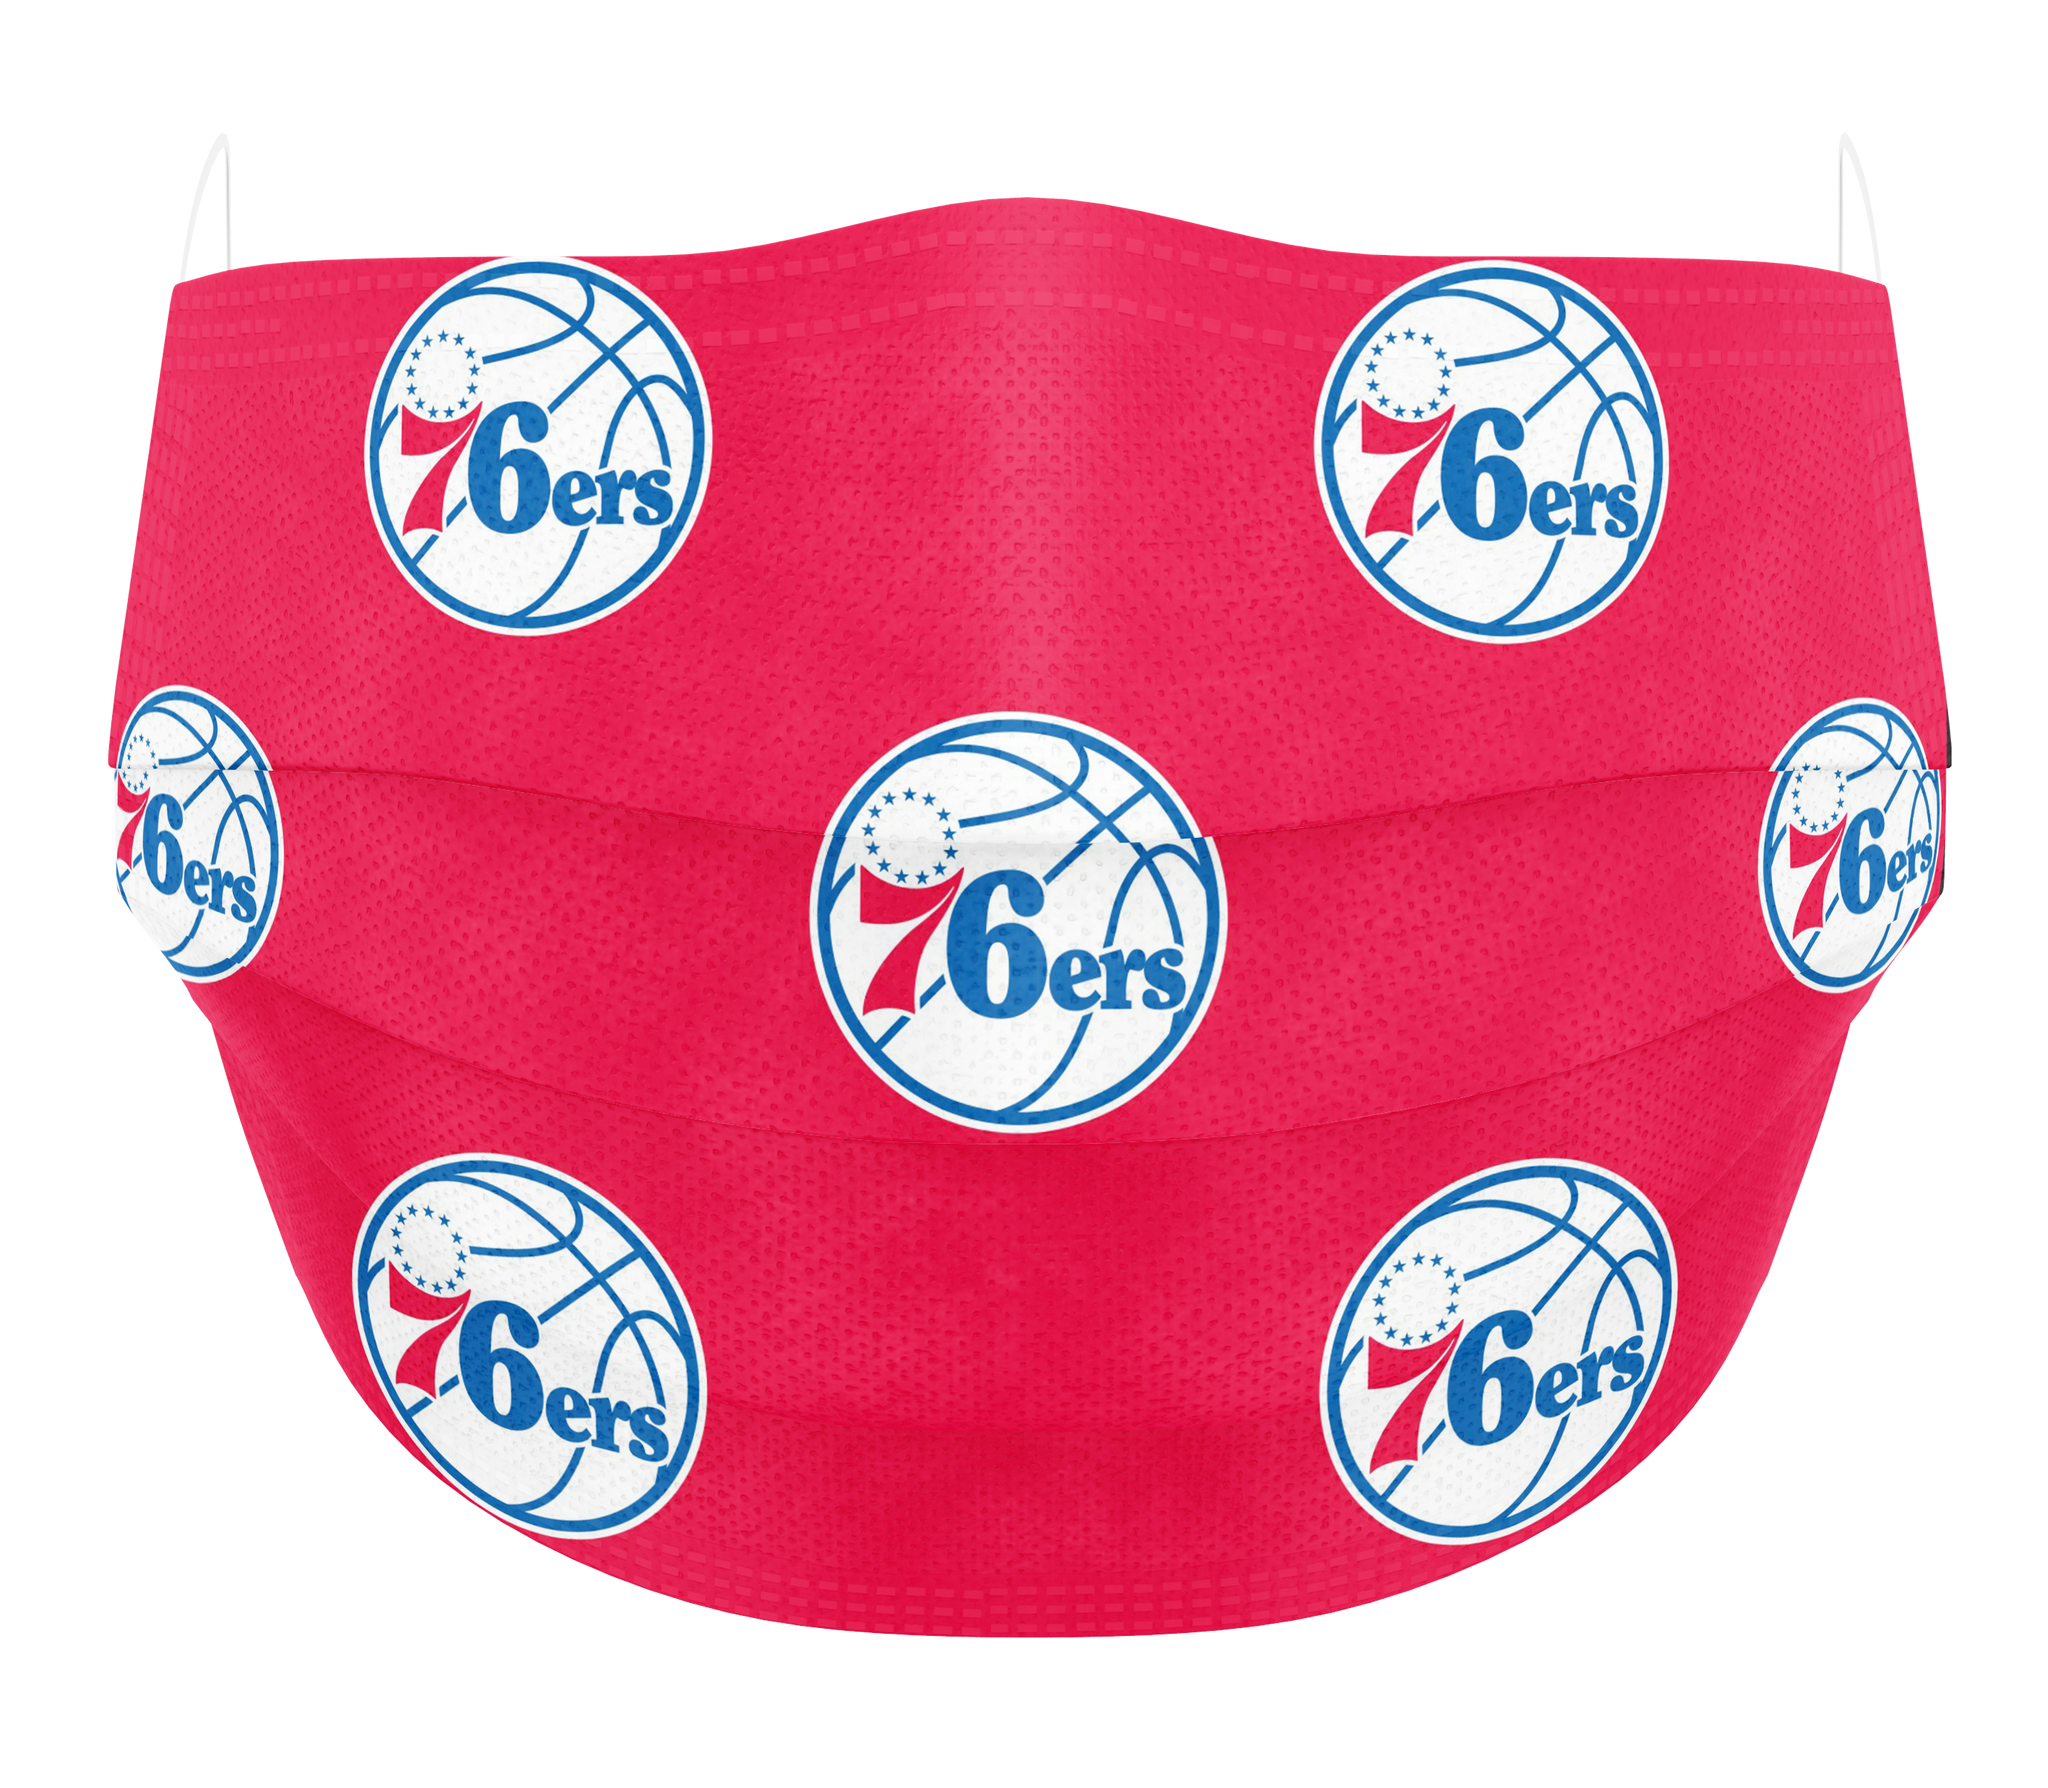 Co.Protect] NBA Mask - Golden State Warriors - Disposable Mask (2